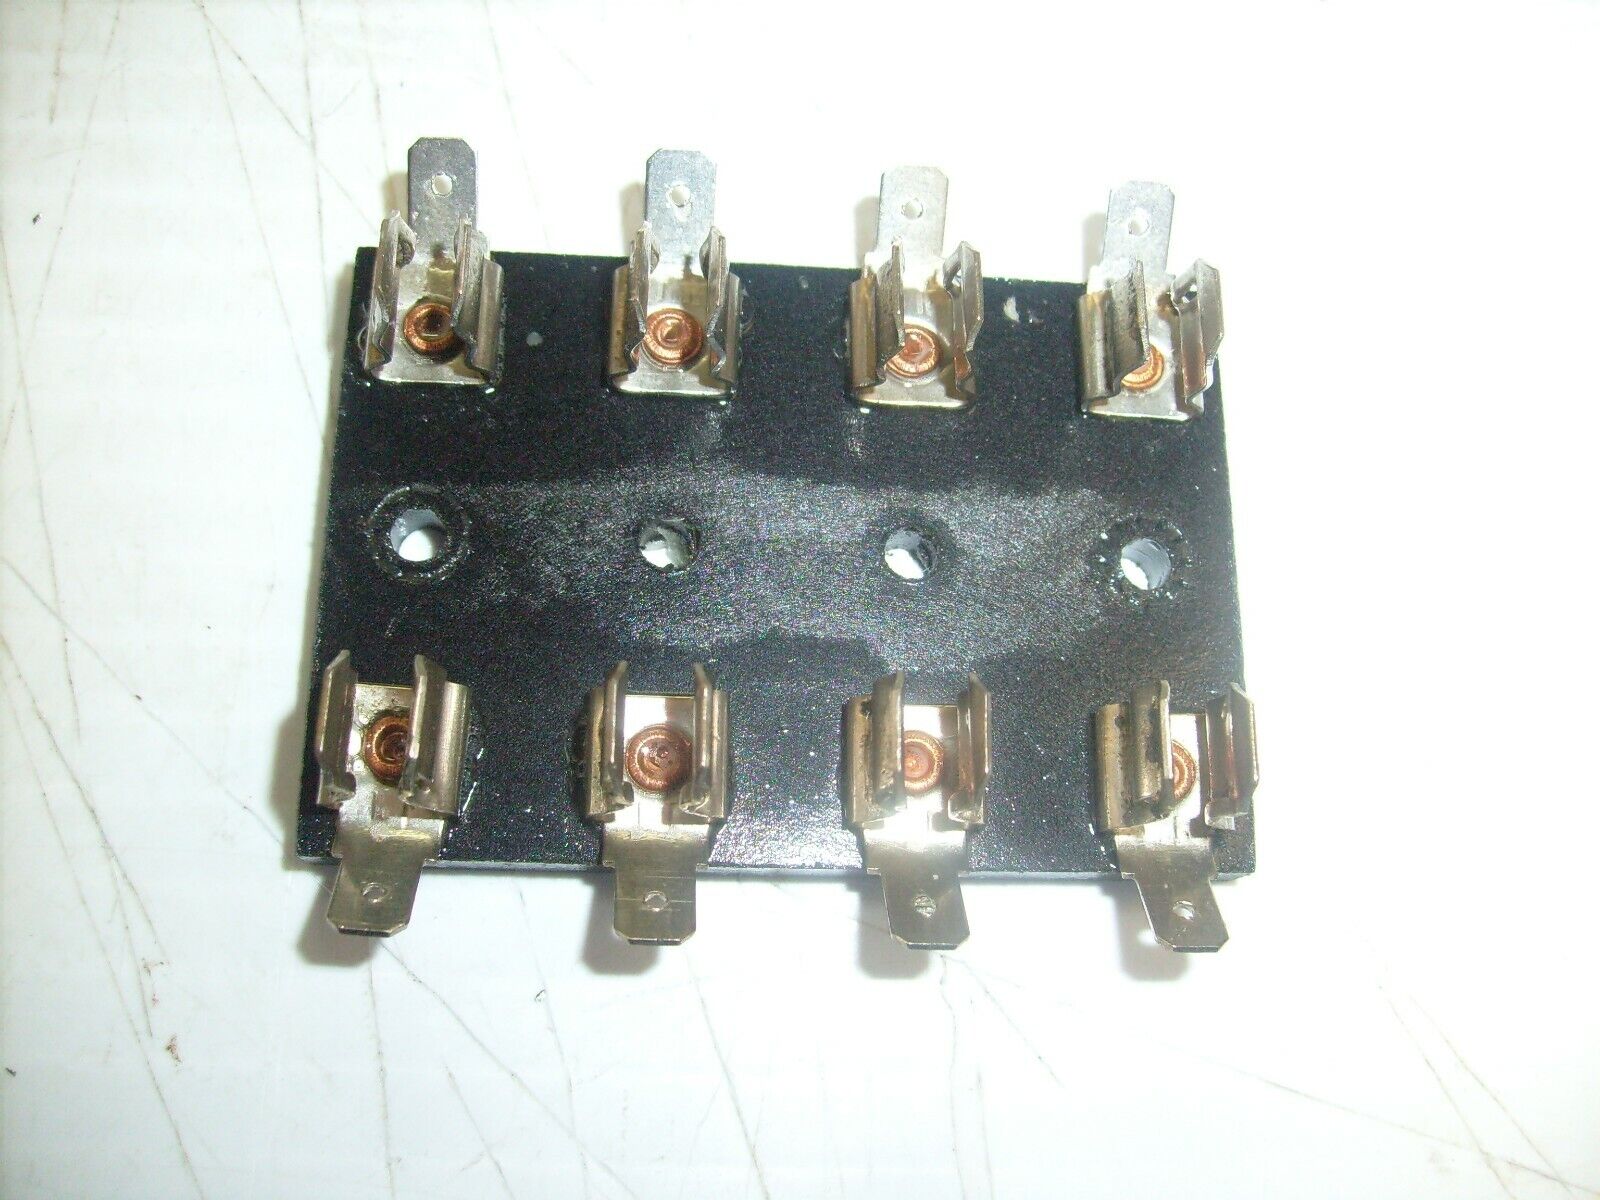 One 4 fuse holder Block Panel for ham radio tube amplifier stereo projects CB